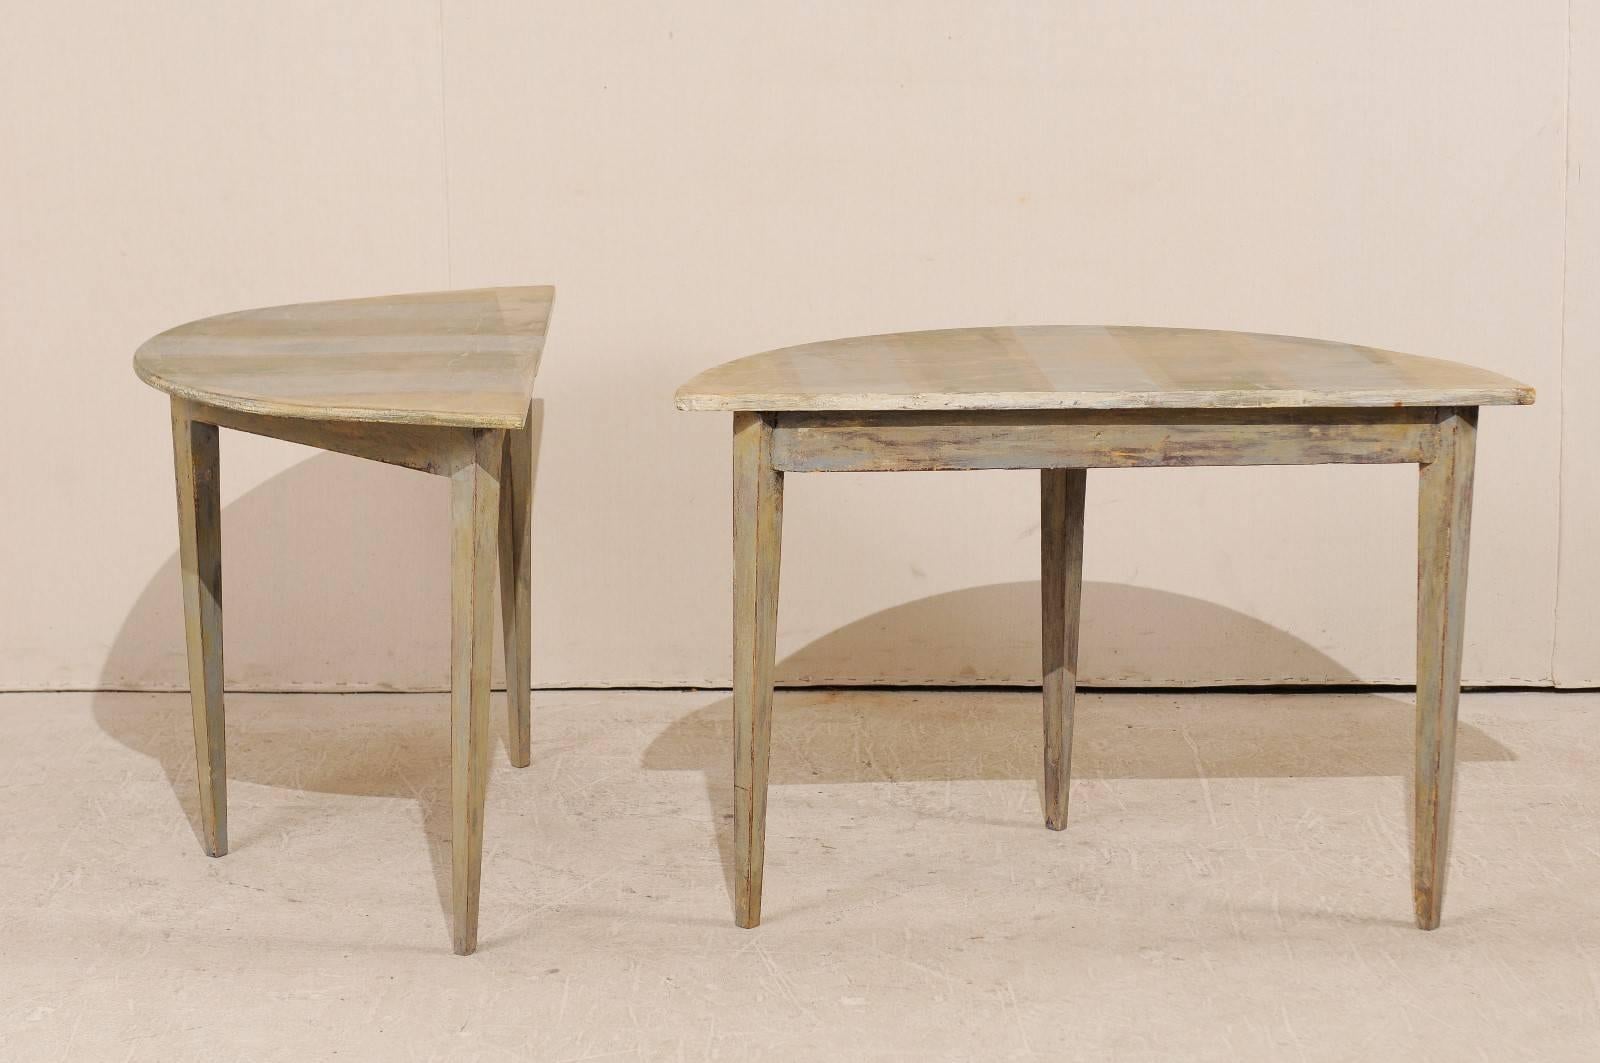 Pair of 19th Century Swedish Painted Wood Demi-Lune Tables with Unique Stripes 1